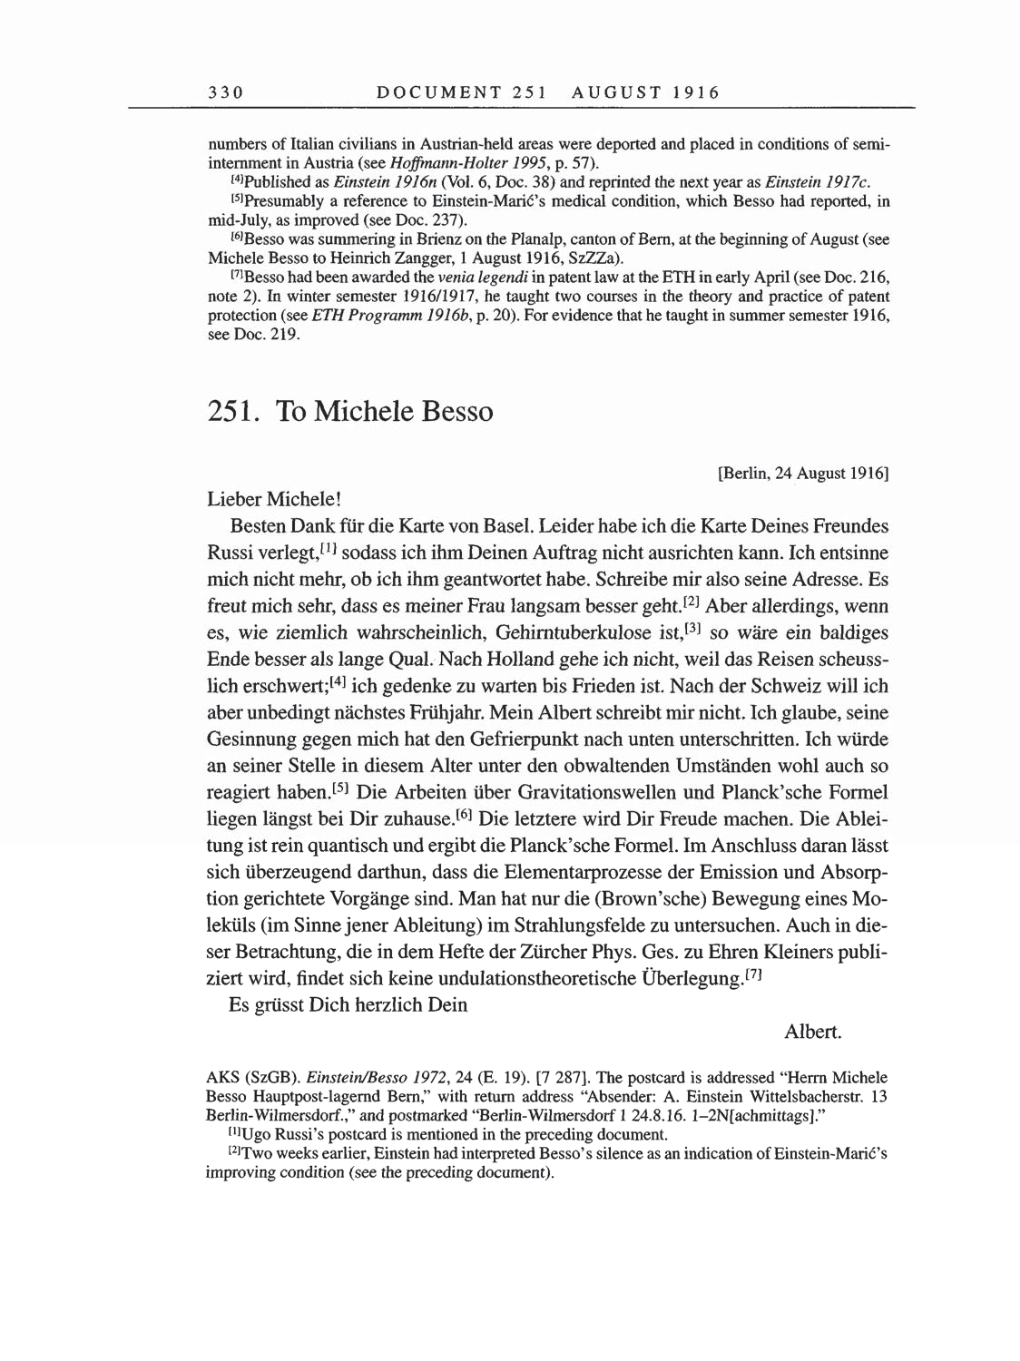 Volume 8, Part A: The Berlin Years: Correspondence 1914-1917 page 330